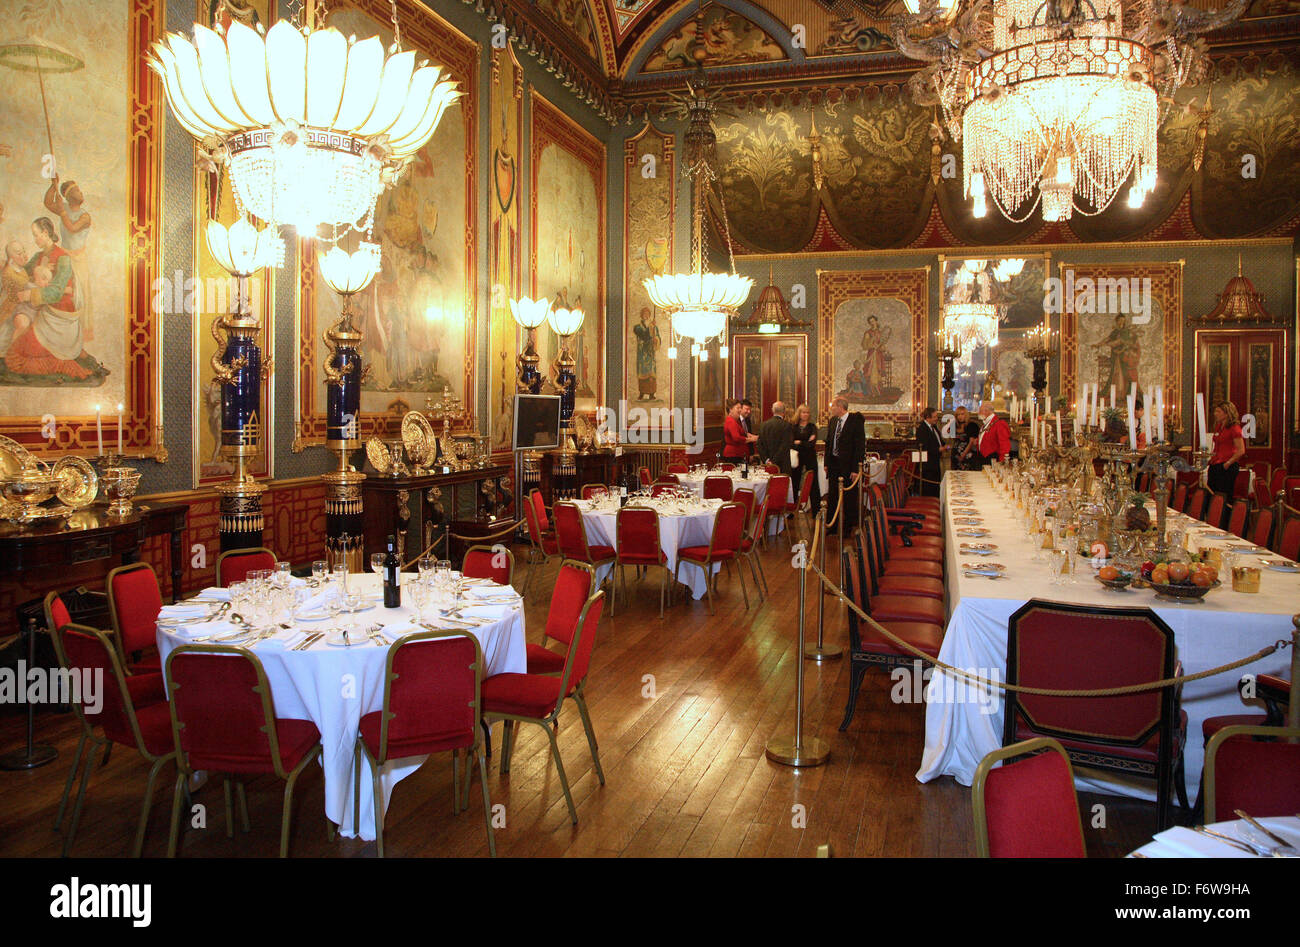 The dining room at he Royal Pavilion Building in Brighton, UK. Set up for a corporate dinner event Stock Photo